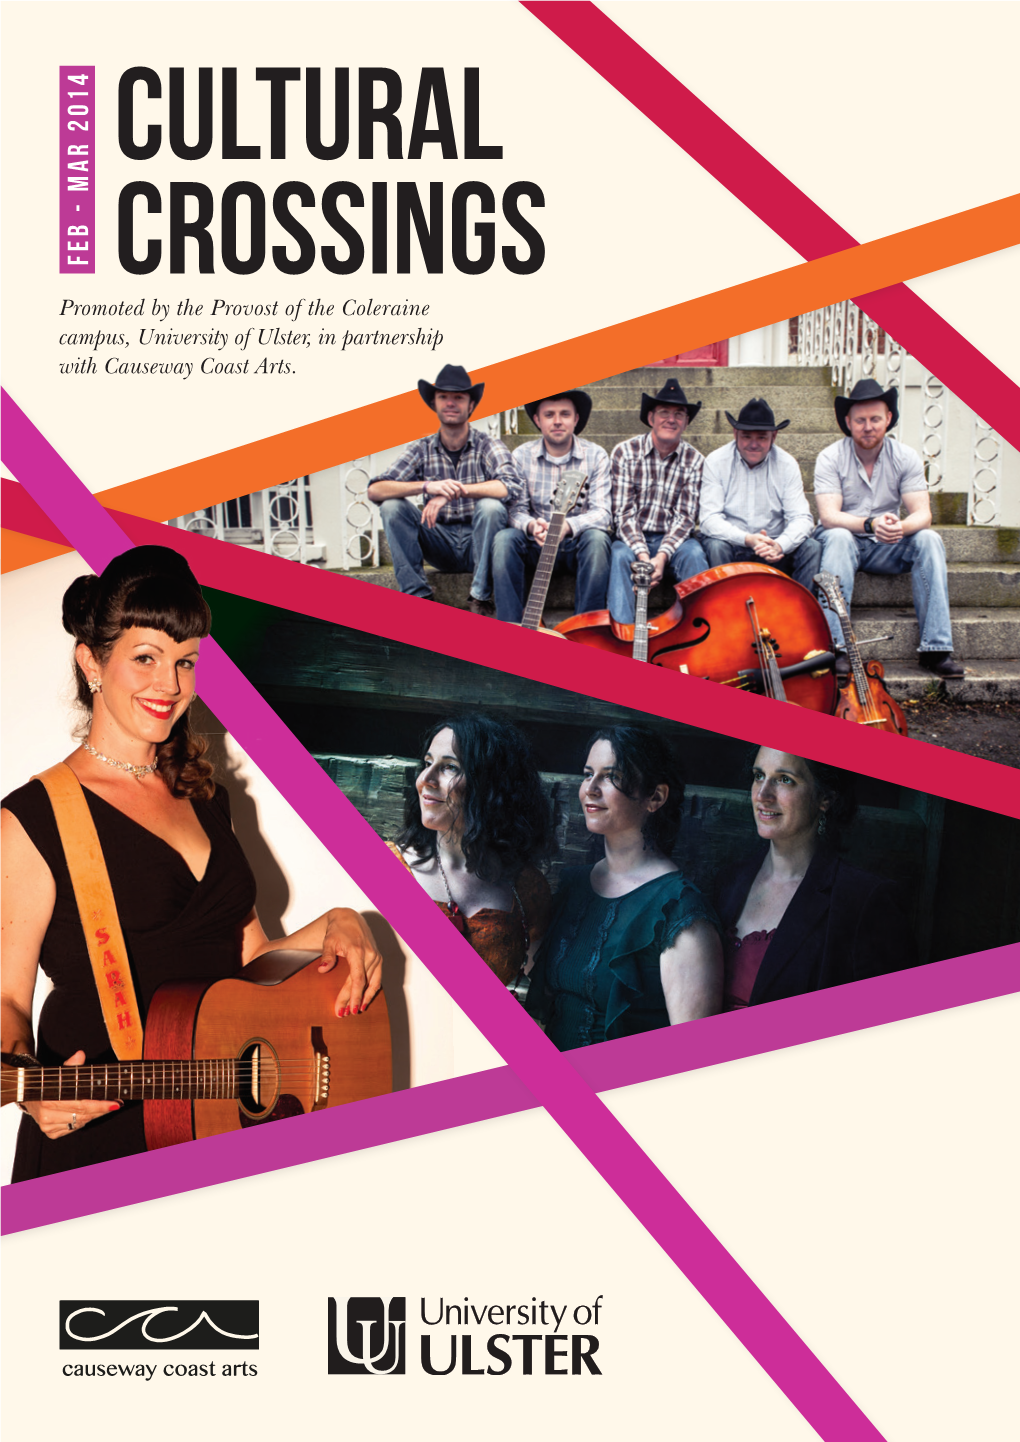 Cultural Crossings Is the Result of a Partnership Between the Provost of the Coleraine Campus, University of Ulster, and Causeway Coast Arts